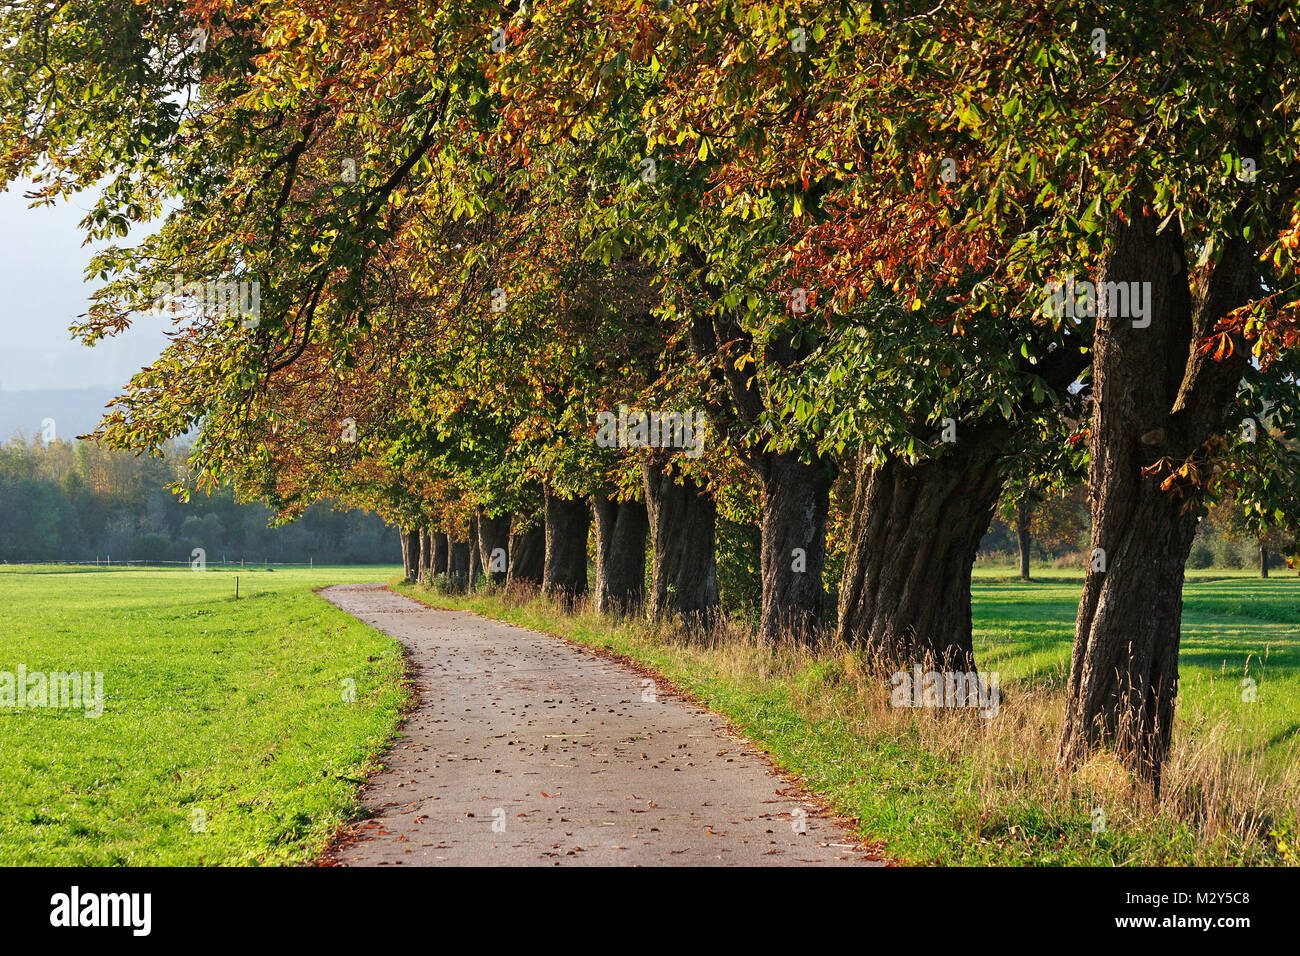 Alley with chestnut trees Stock Photo